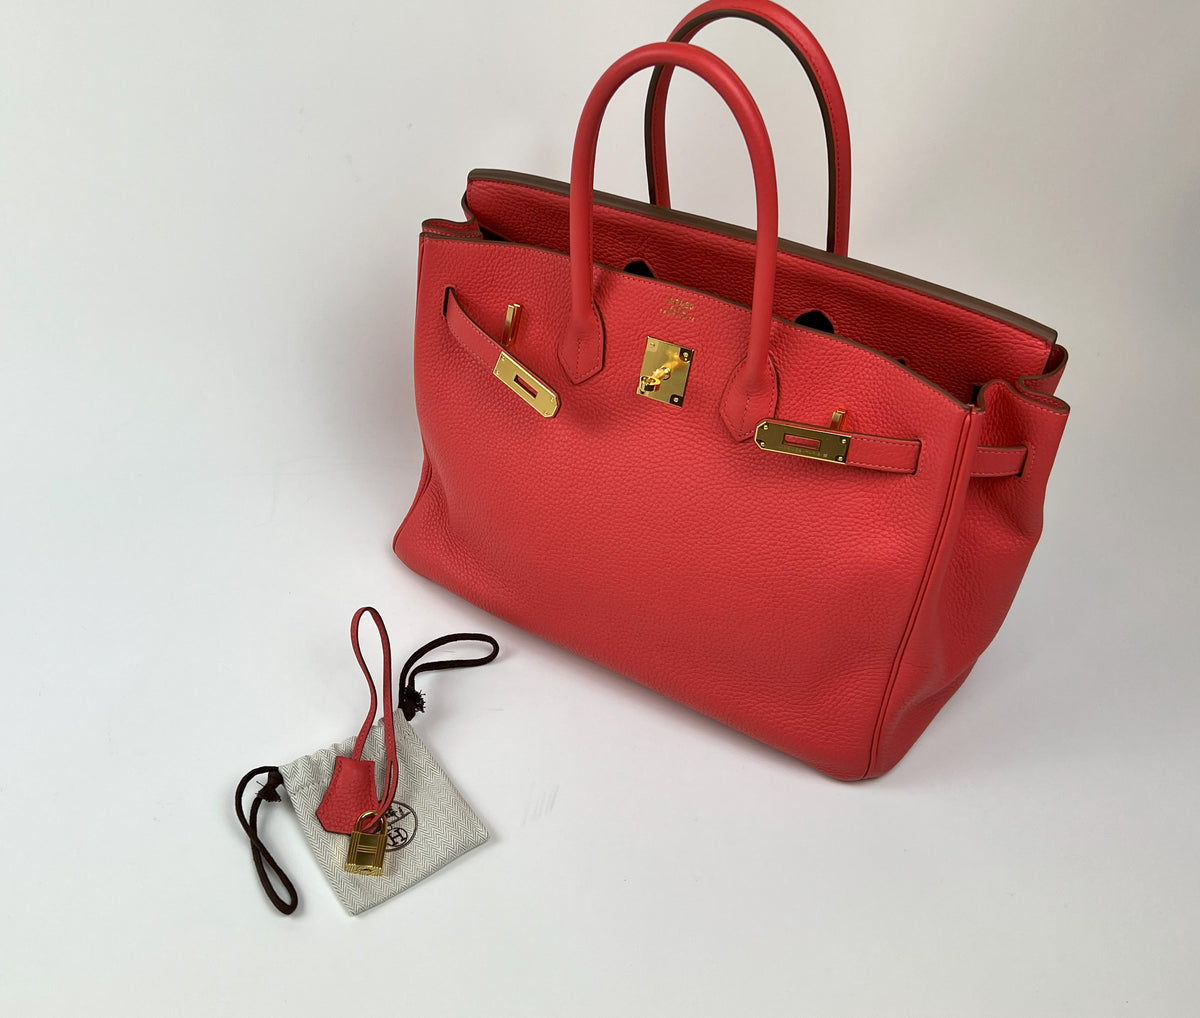 Excellent Pre-Loved Bright Rosy Red Grained Leather Top Handle Bag(accessories)